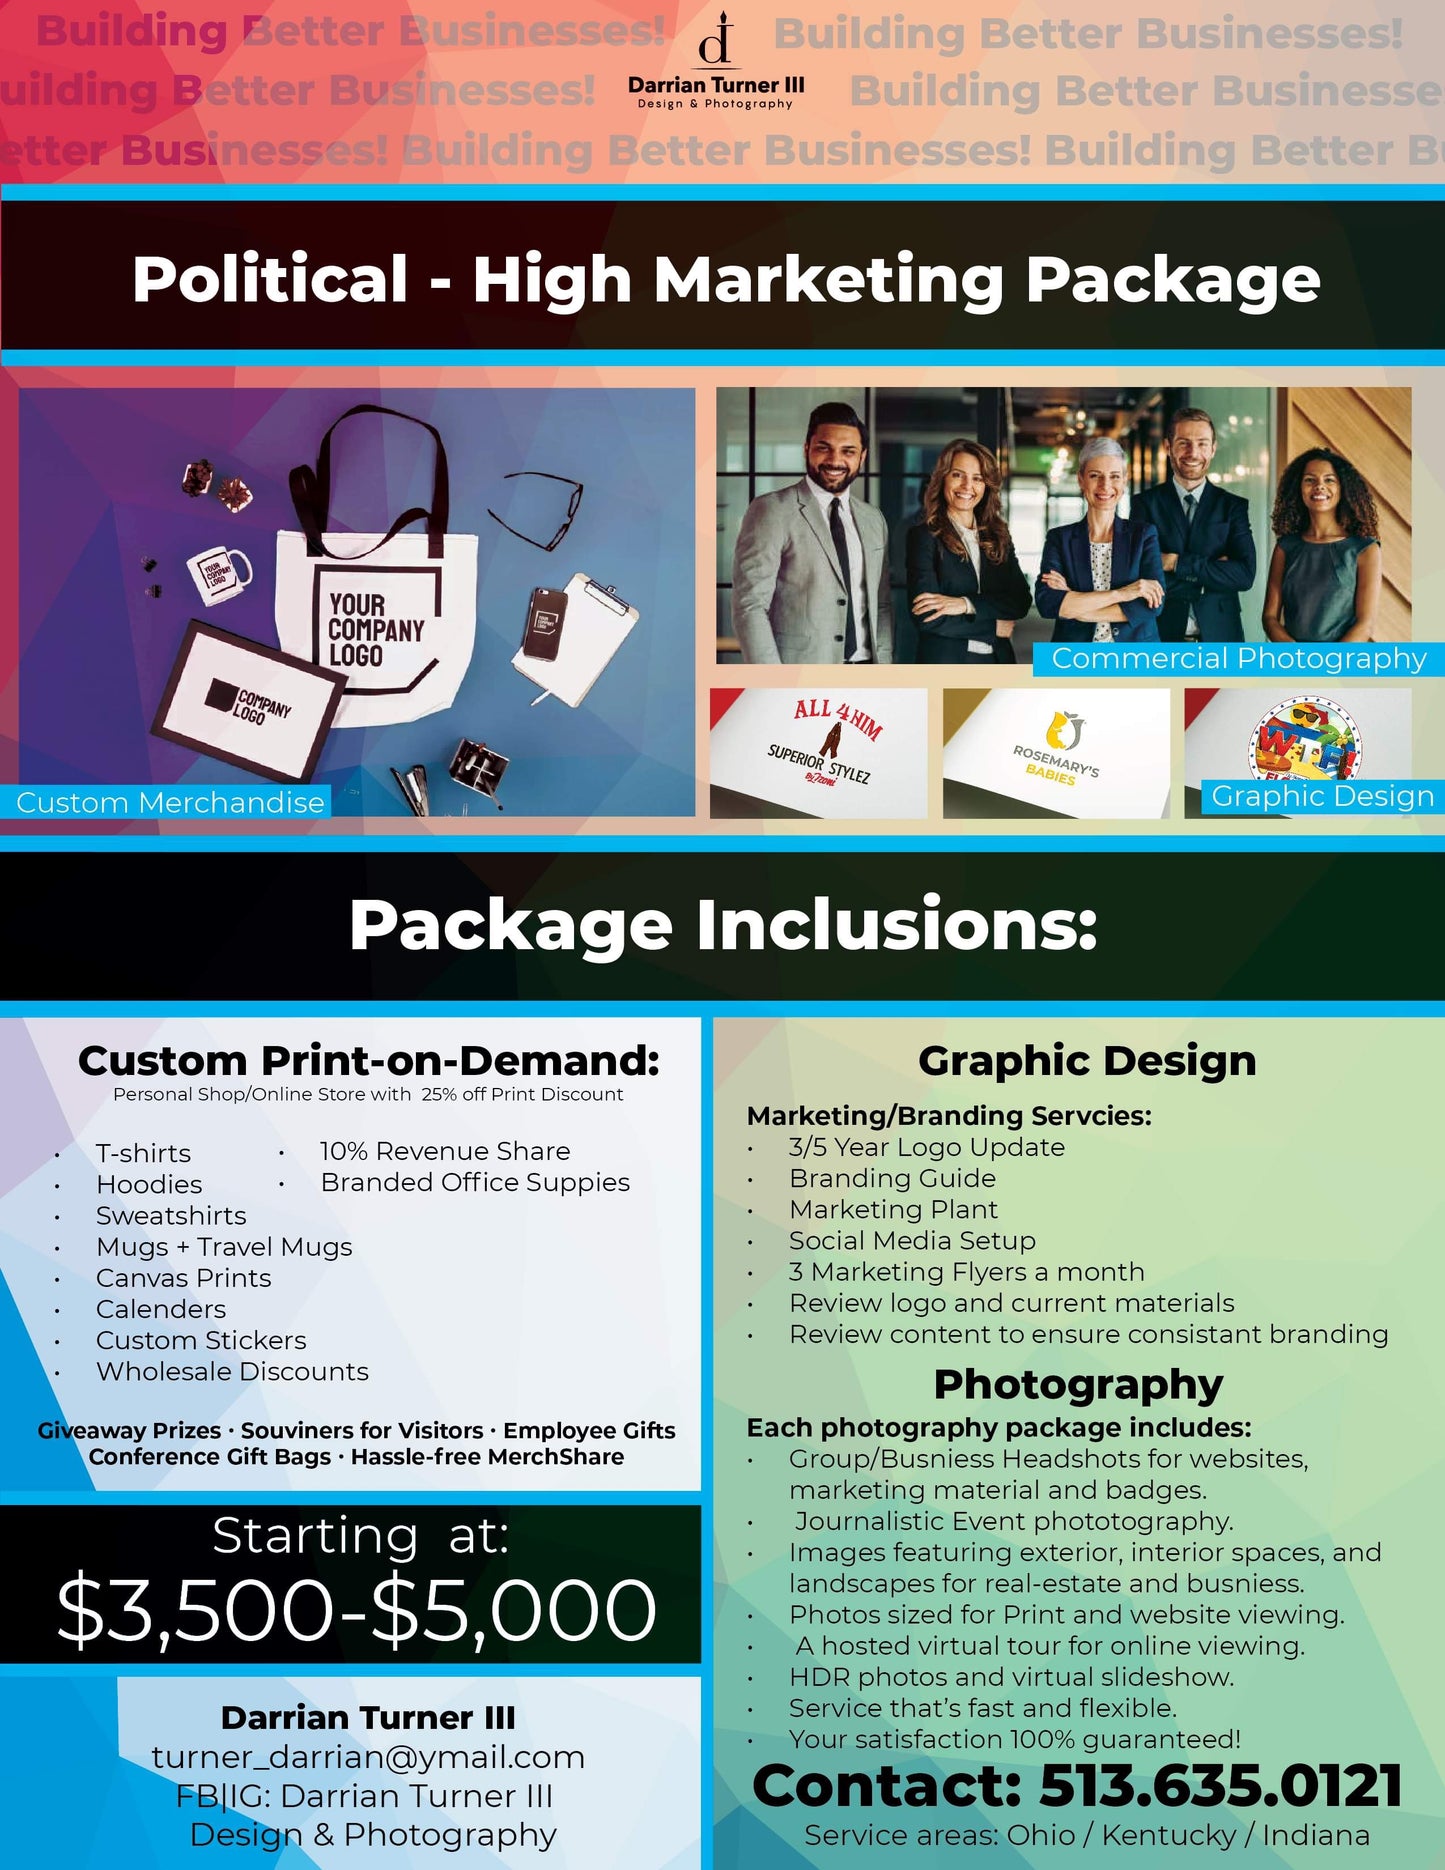 Political Leaders - High Marketing Package